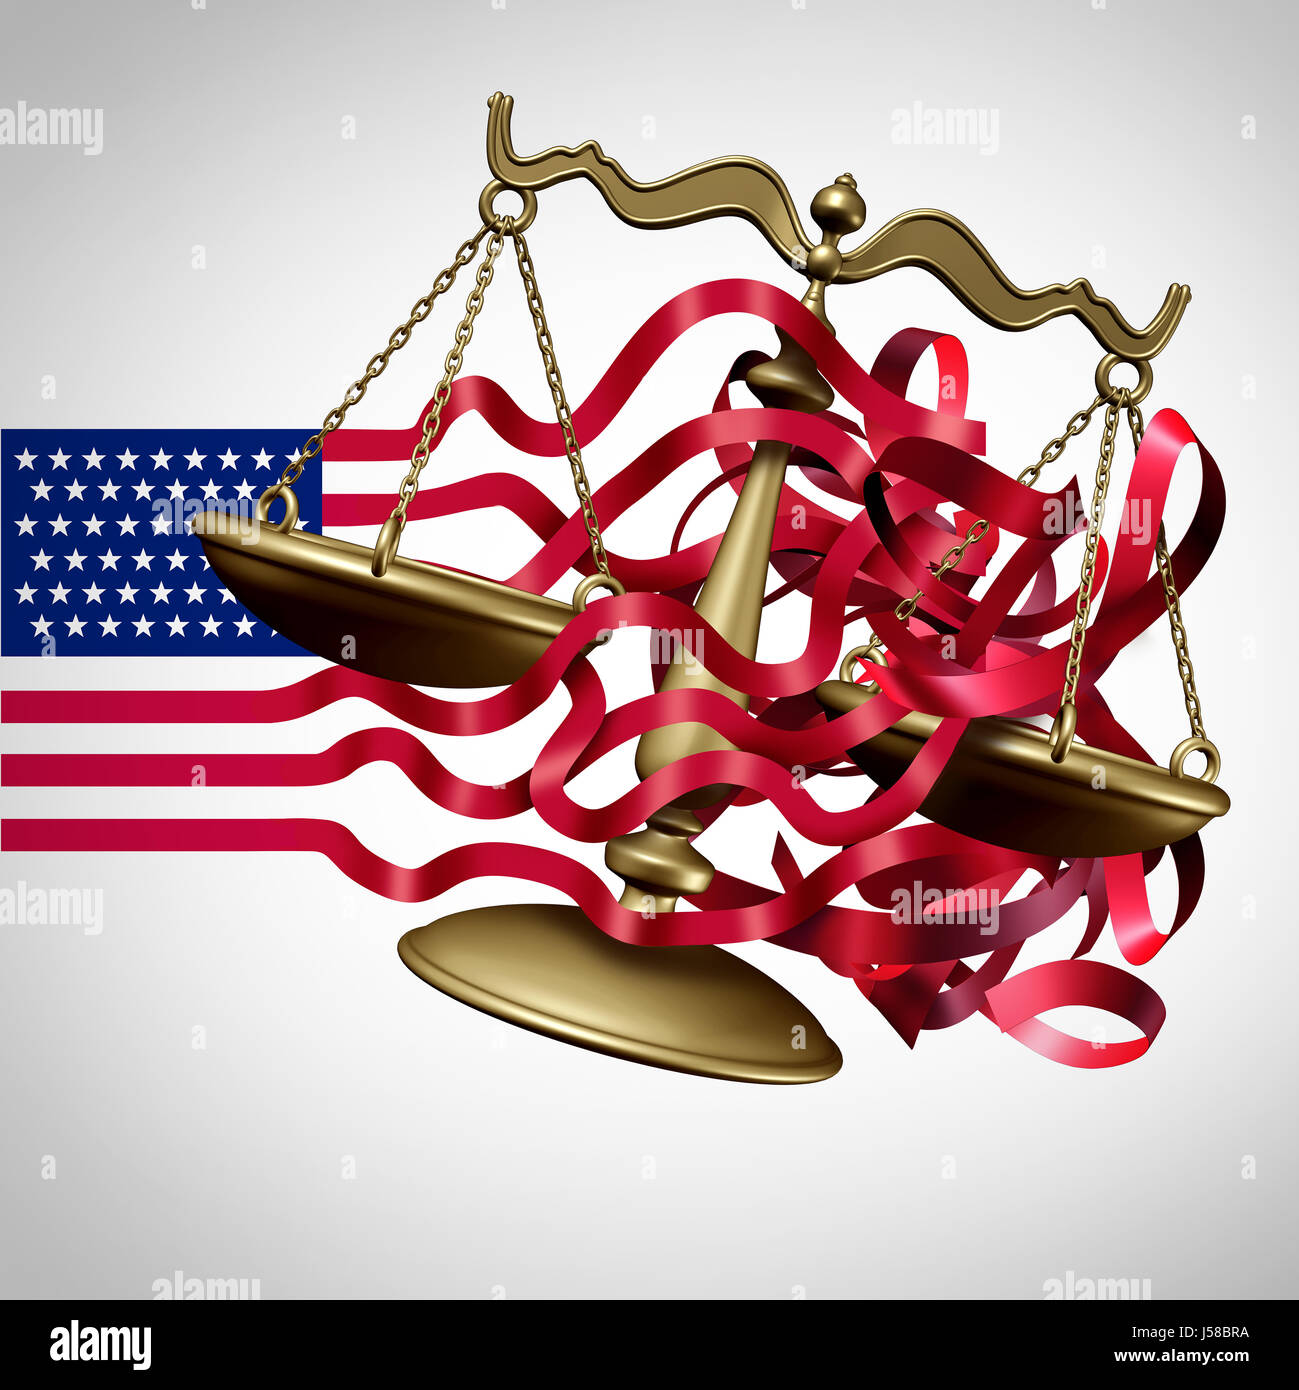 American Legal System Challenge and United States business regulations crisis as a flag with stripes tangled with a justice scale. Stock Photo